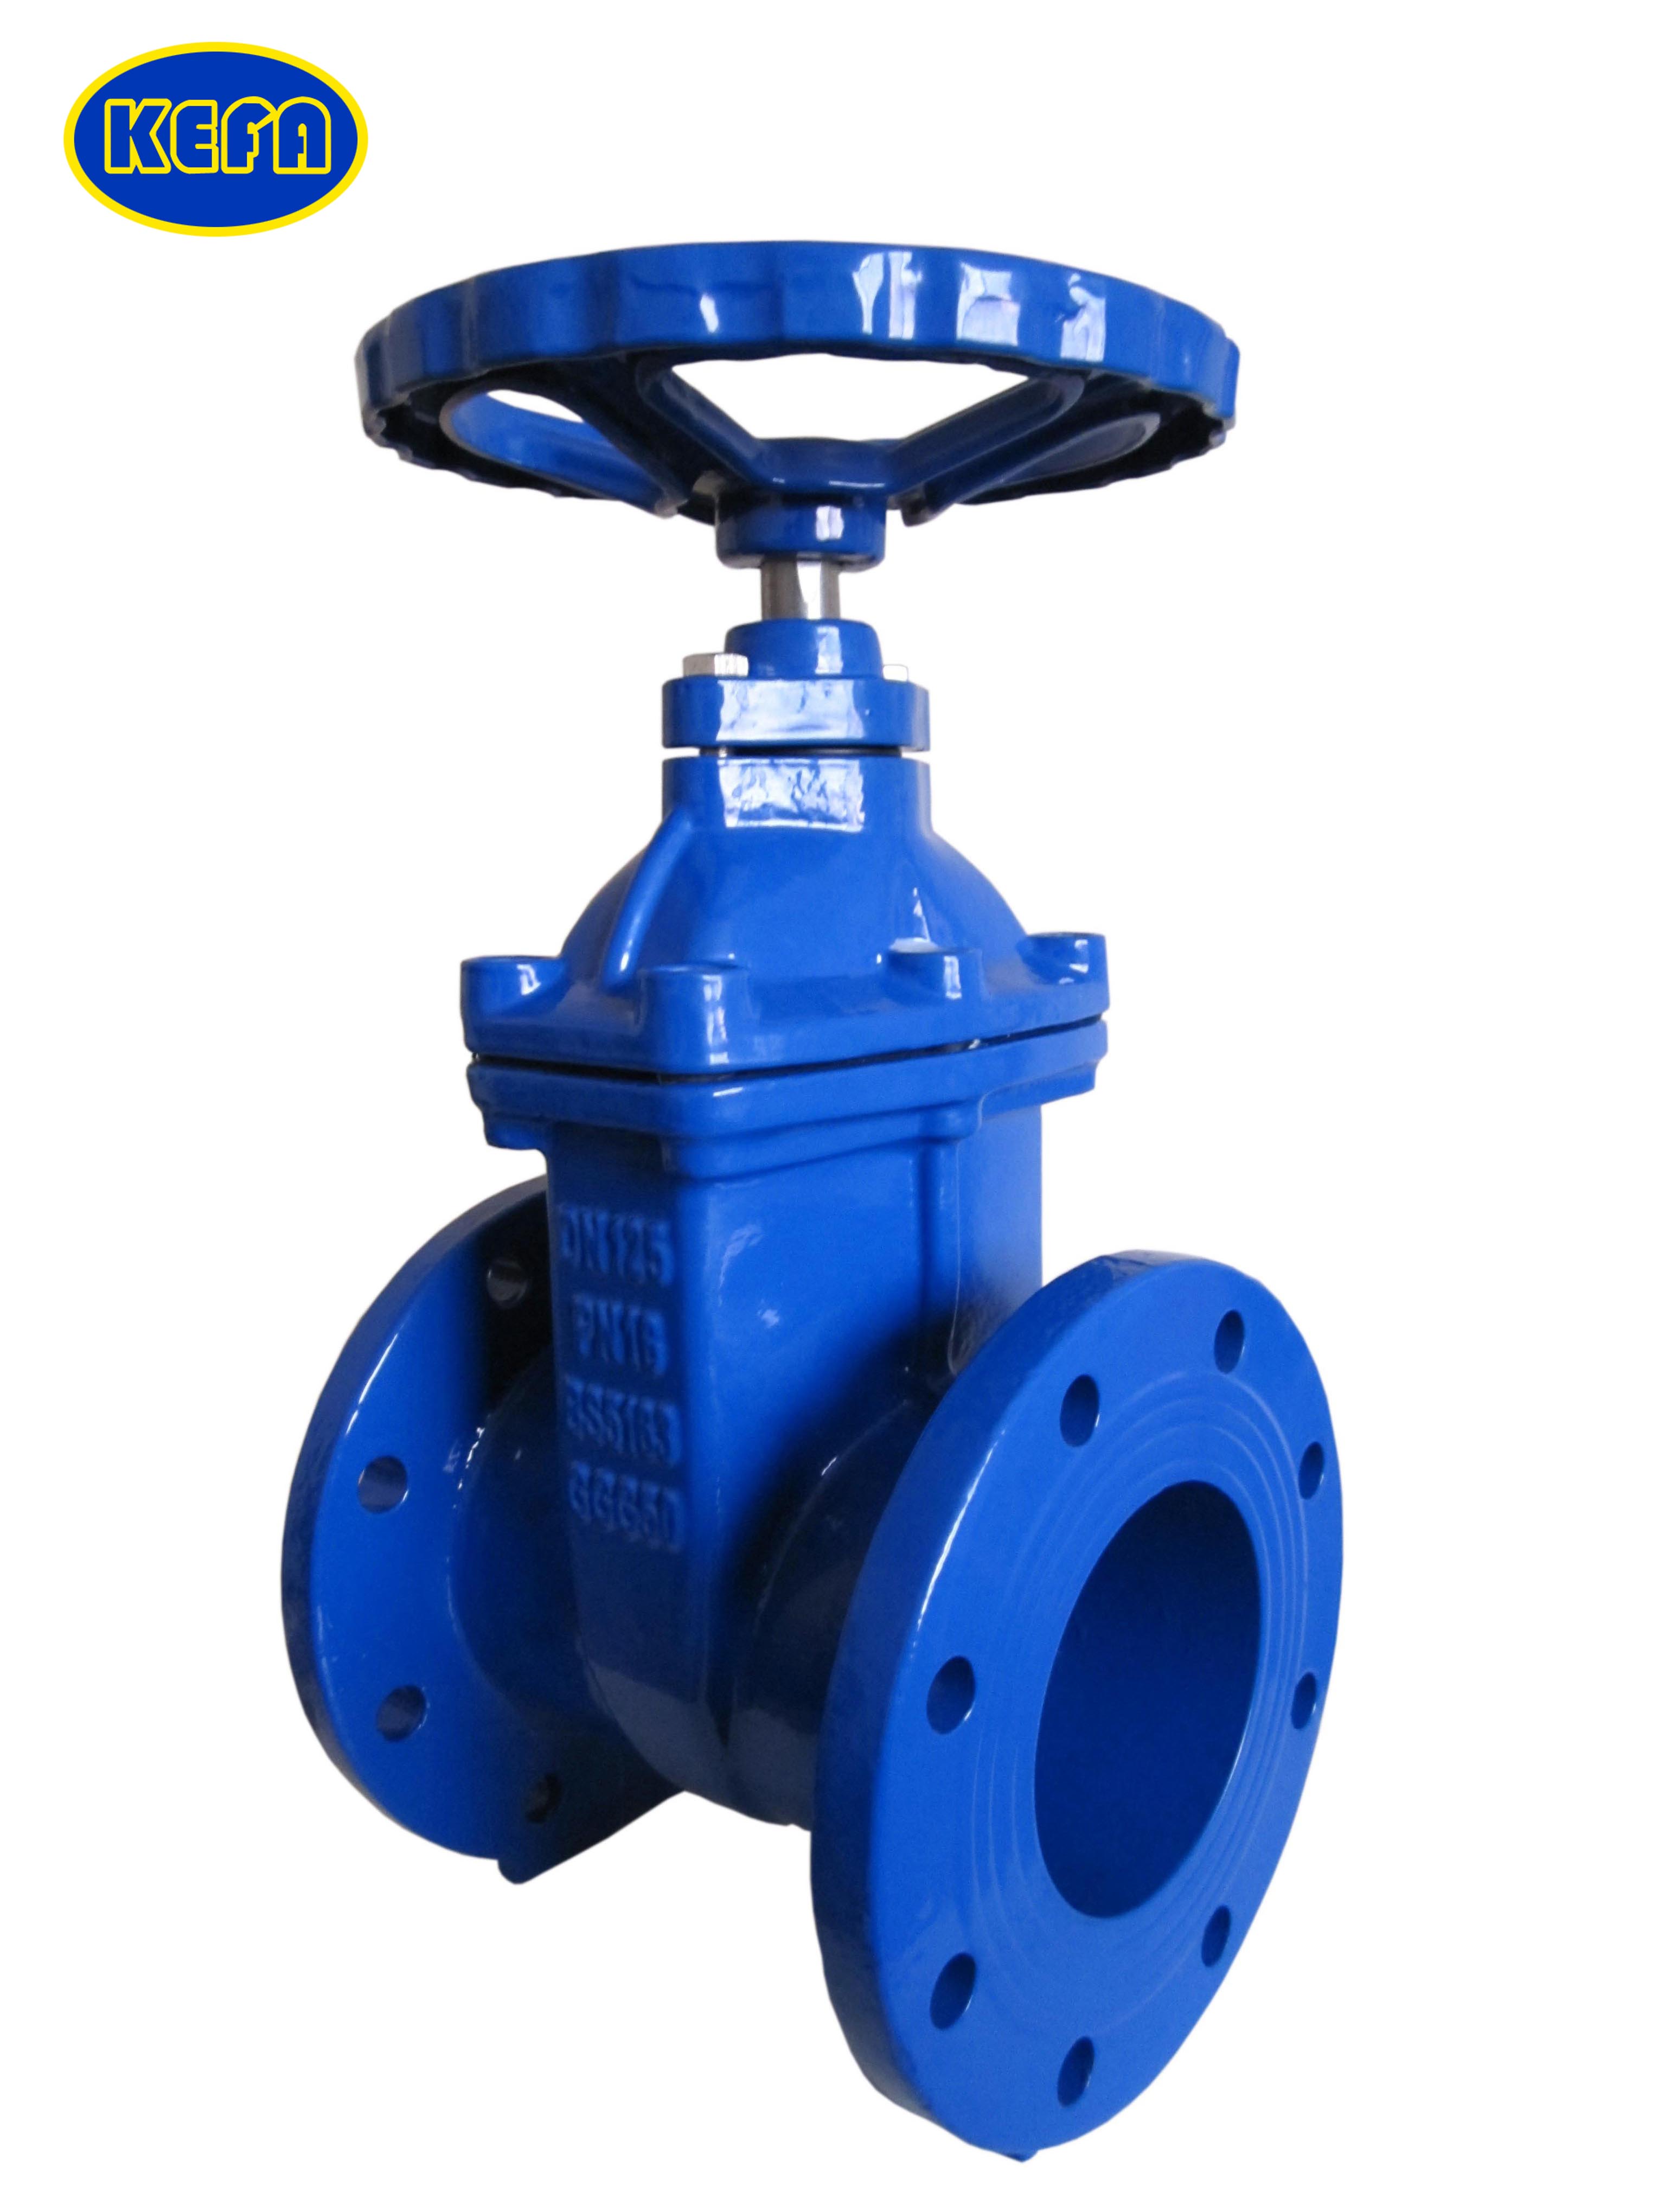 BS5163 Resilient seated gate valve